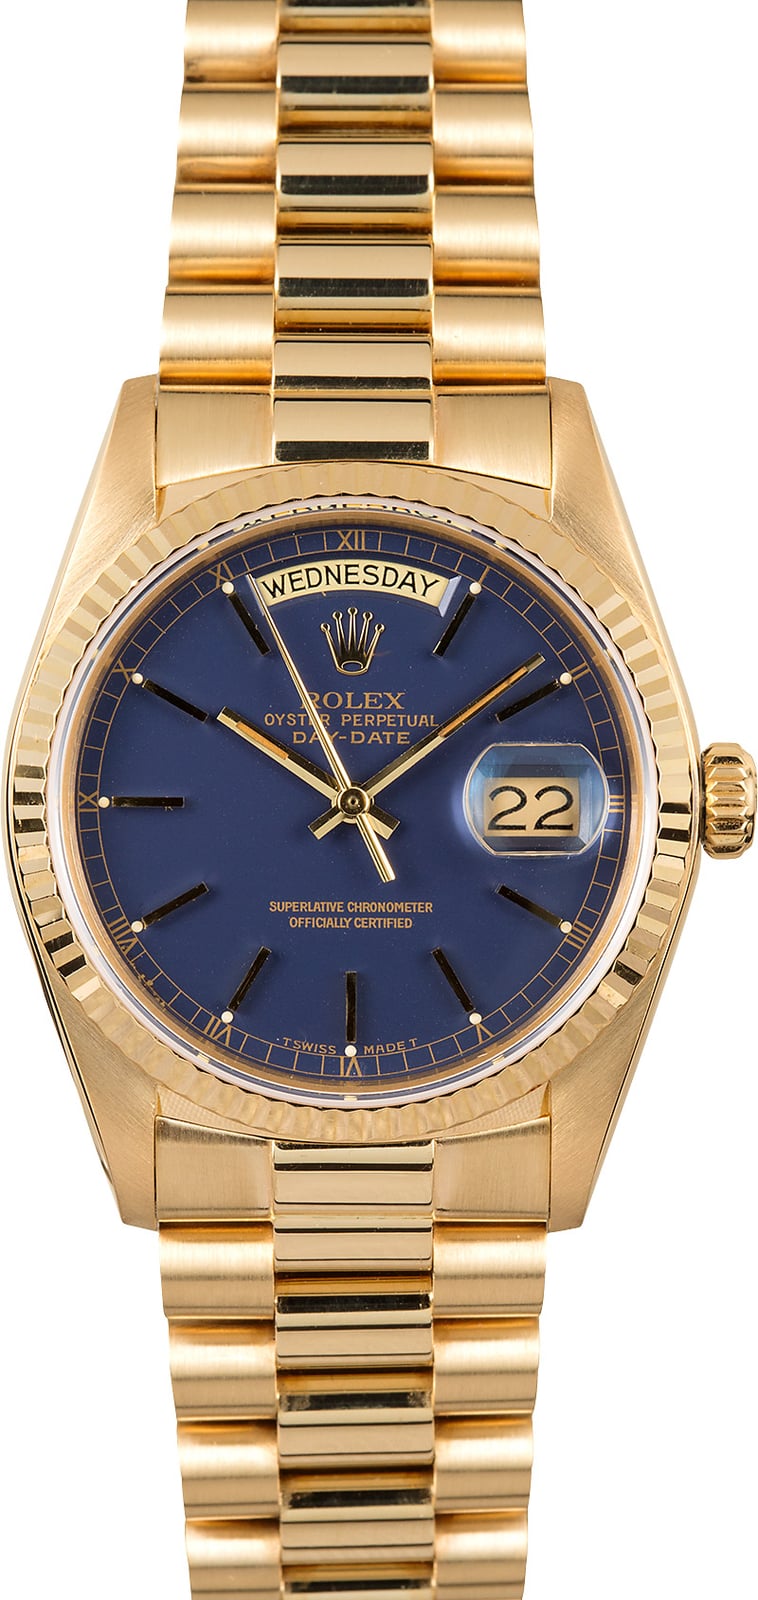 Rolex Day-Date President 18038 Blue Dial